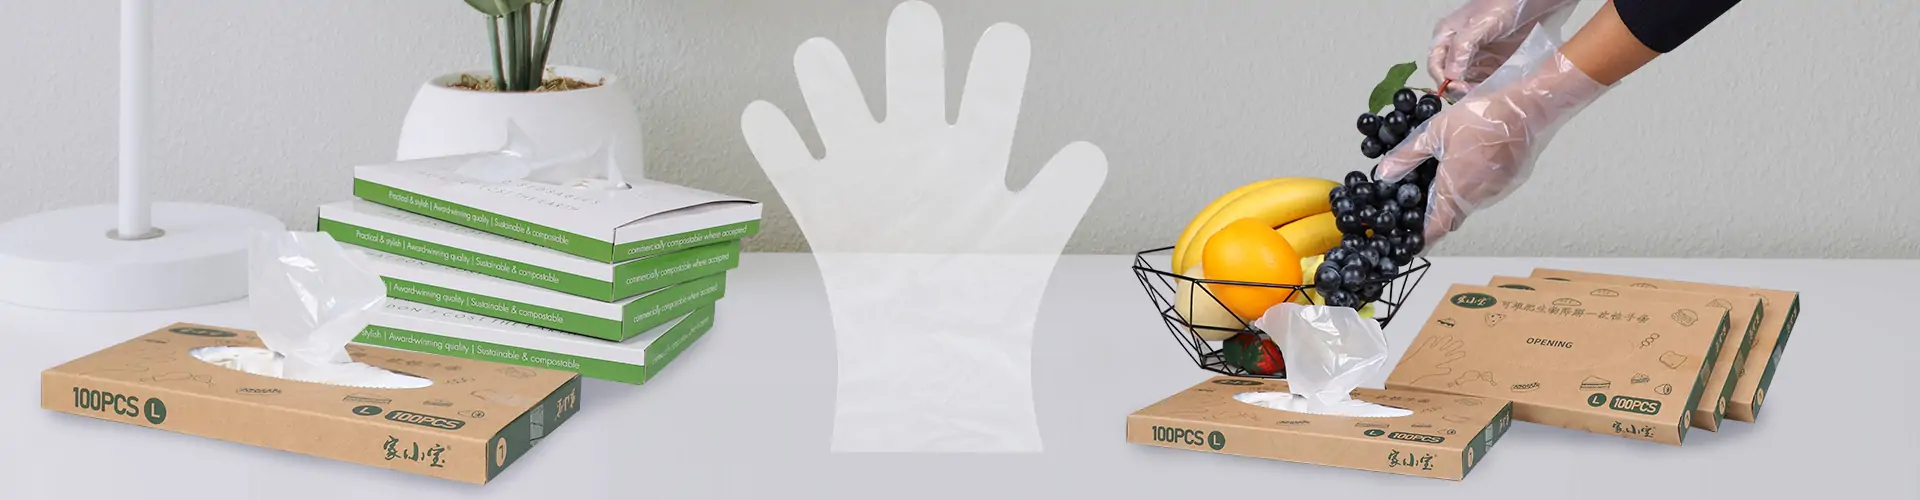 compostable disposable gloves banner